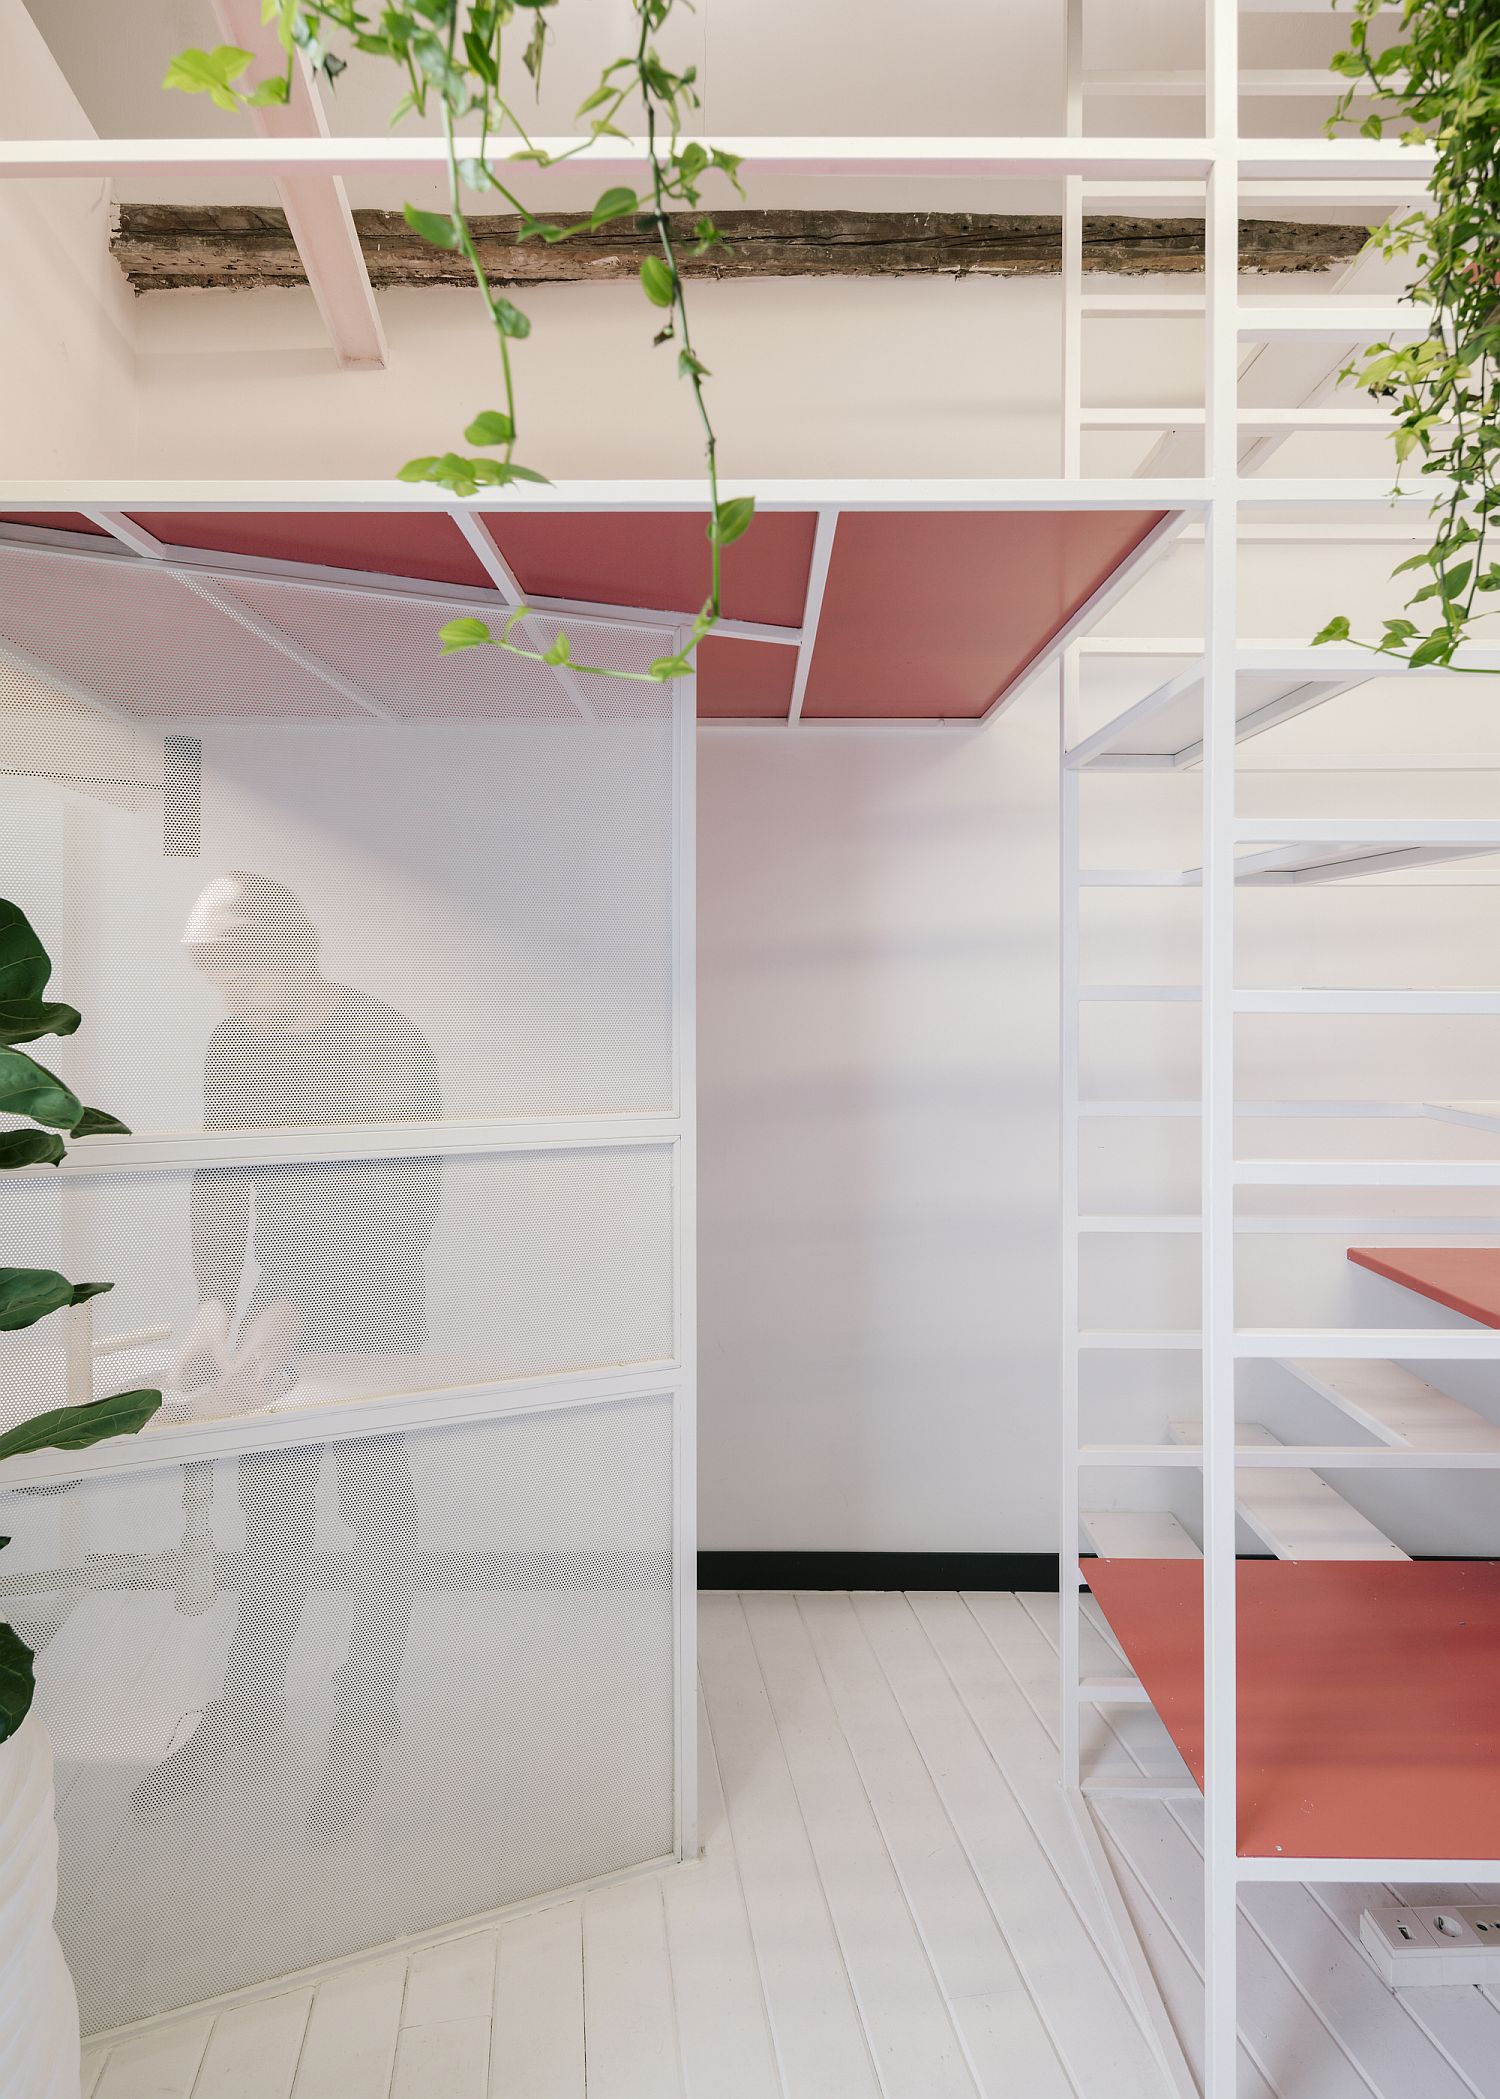 Movable-mesh-door-offers-privacy-while-allowing-light-to-pass-through